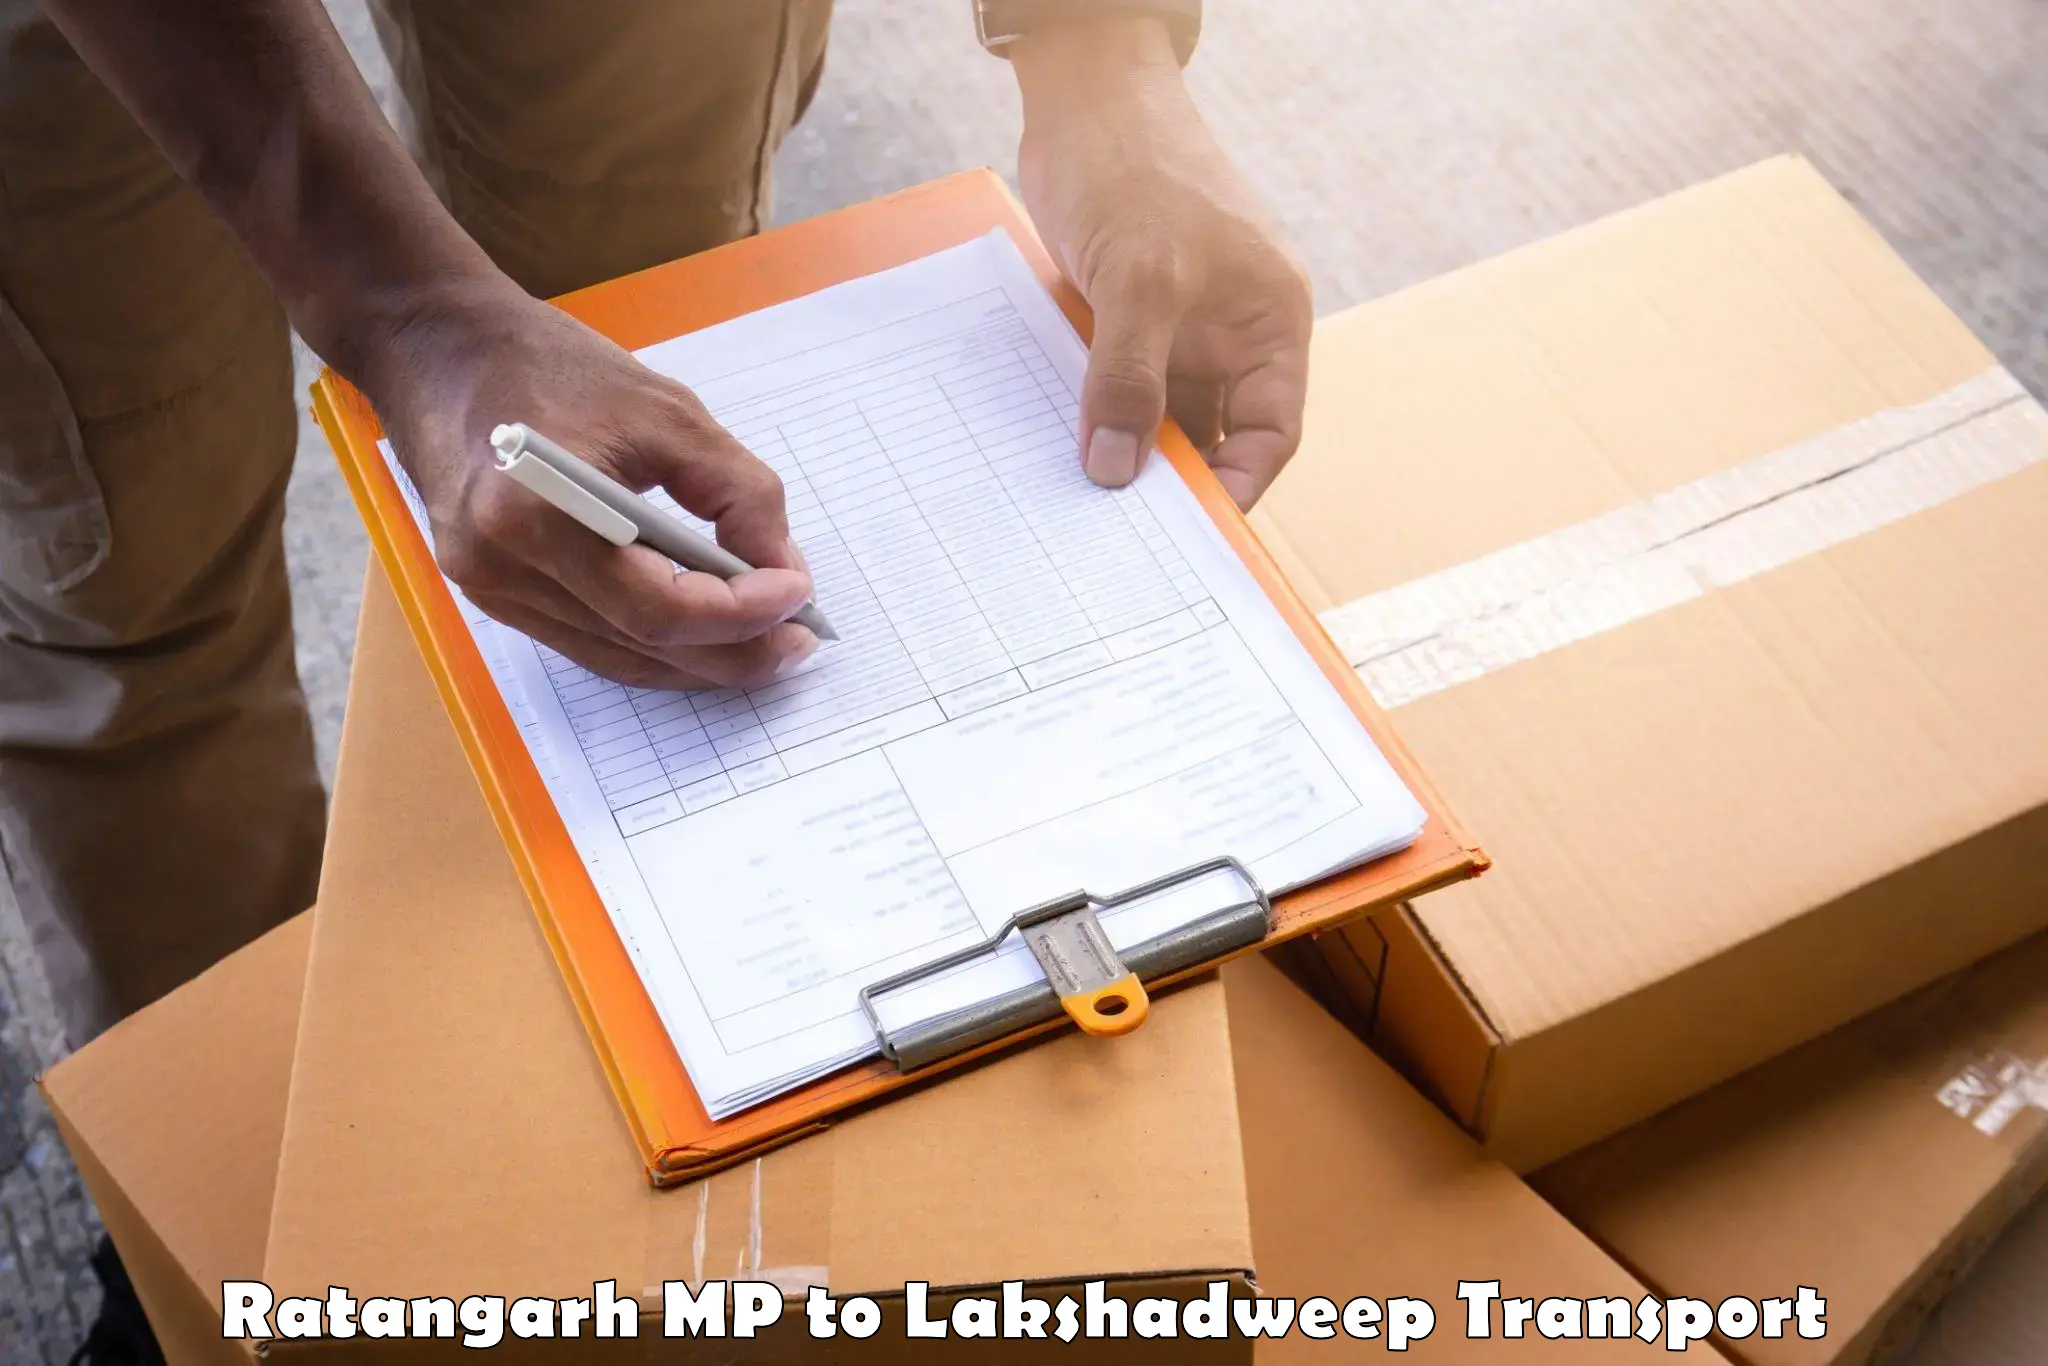 Truck transport companies in India Ratangarh MP to Lakshadweep